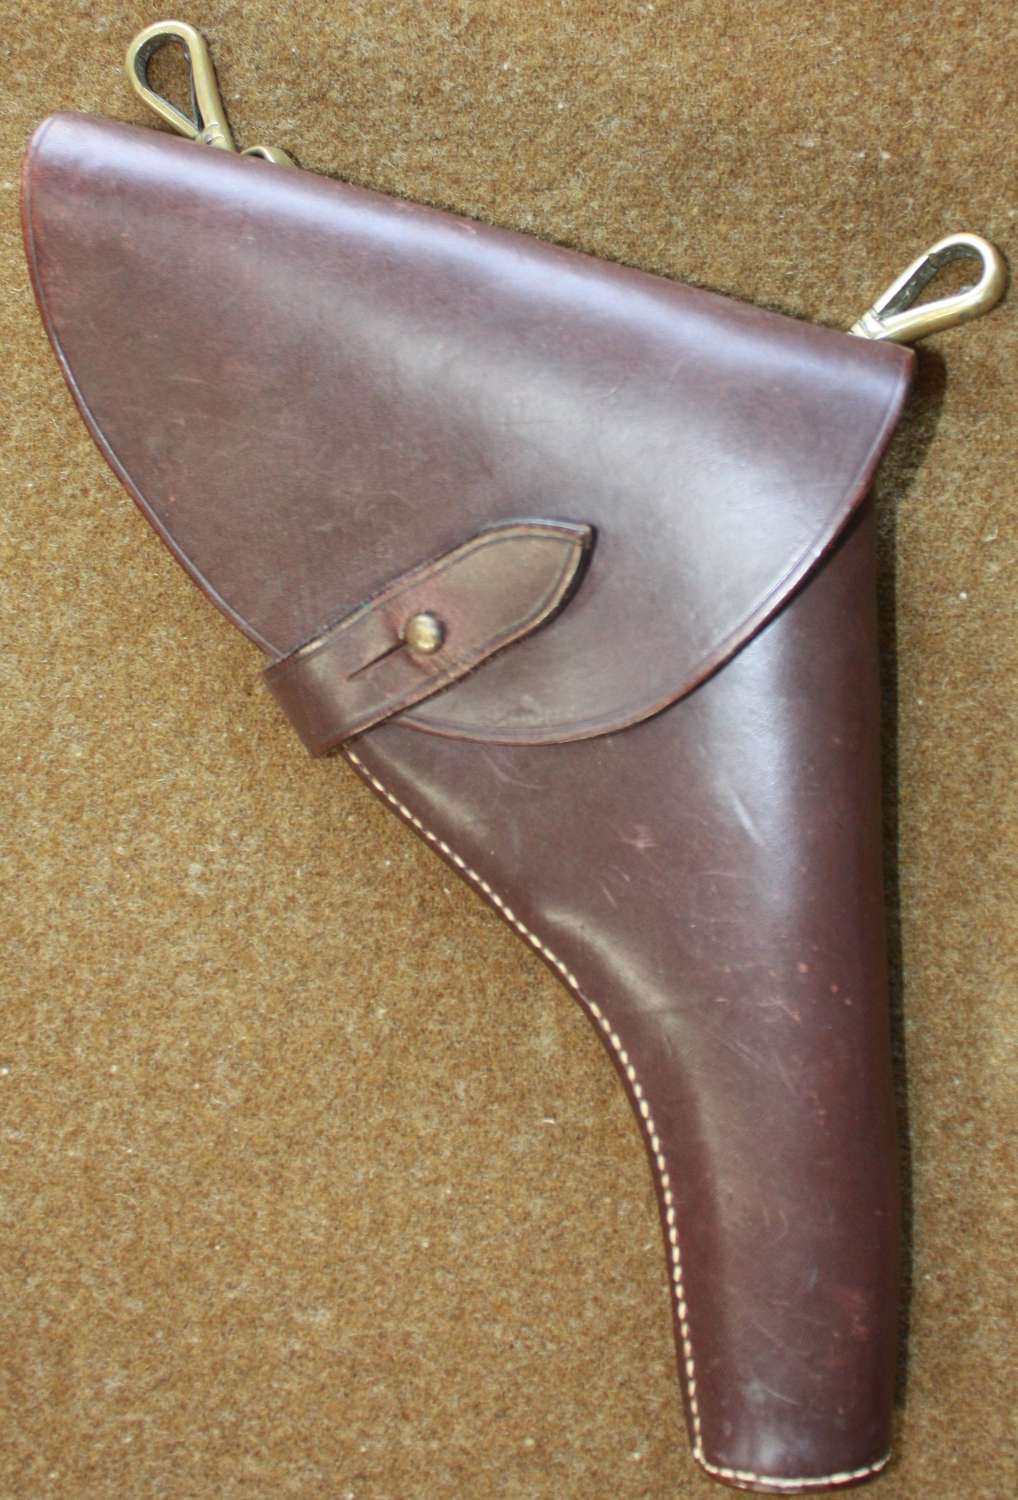 A SAM BROWN PISTOL HOLSTER FOR A SMALL 38 PISTOL